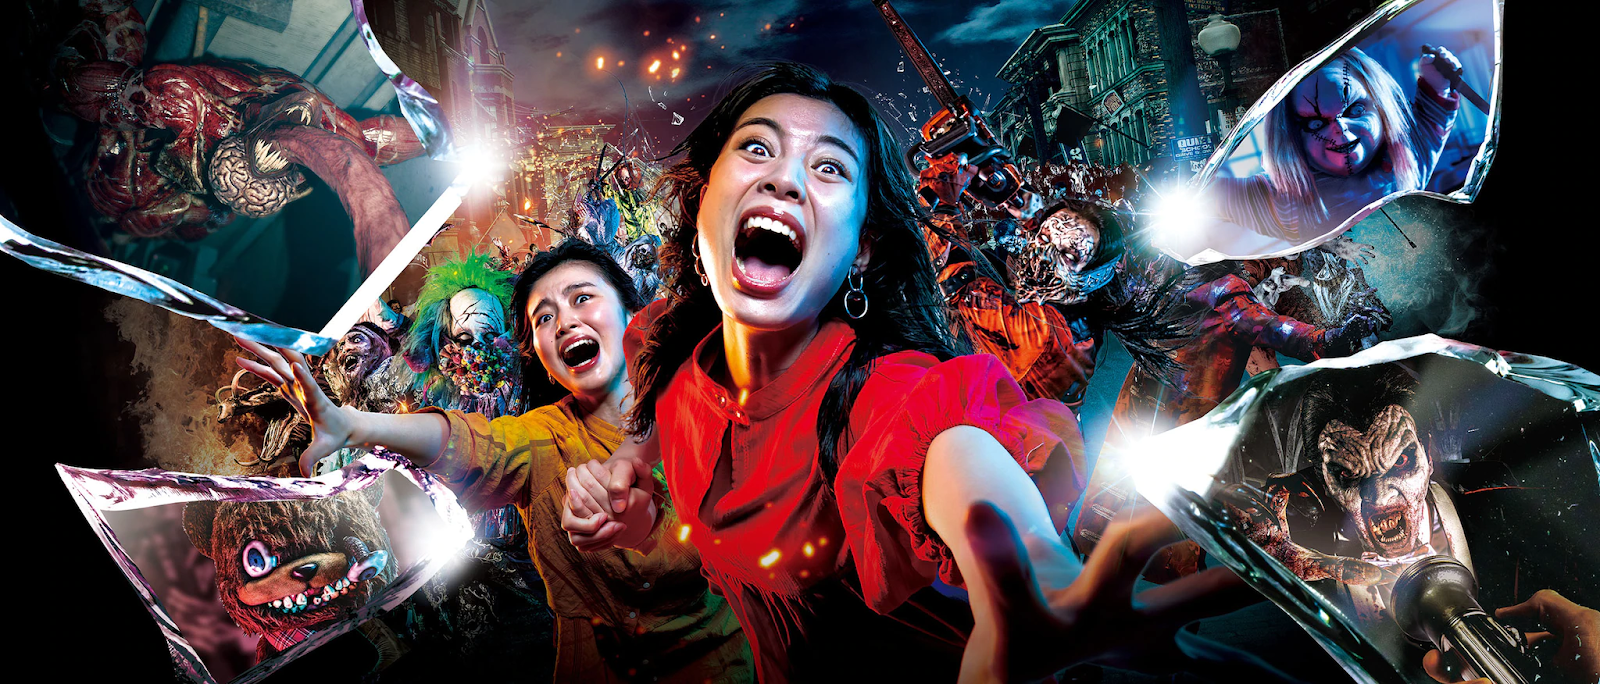 Promotion for Universal Studios Japan's Halloween Horror Nights events.